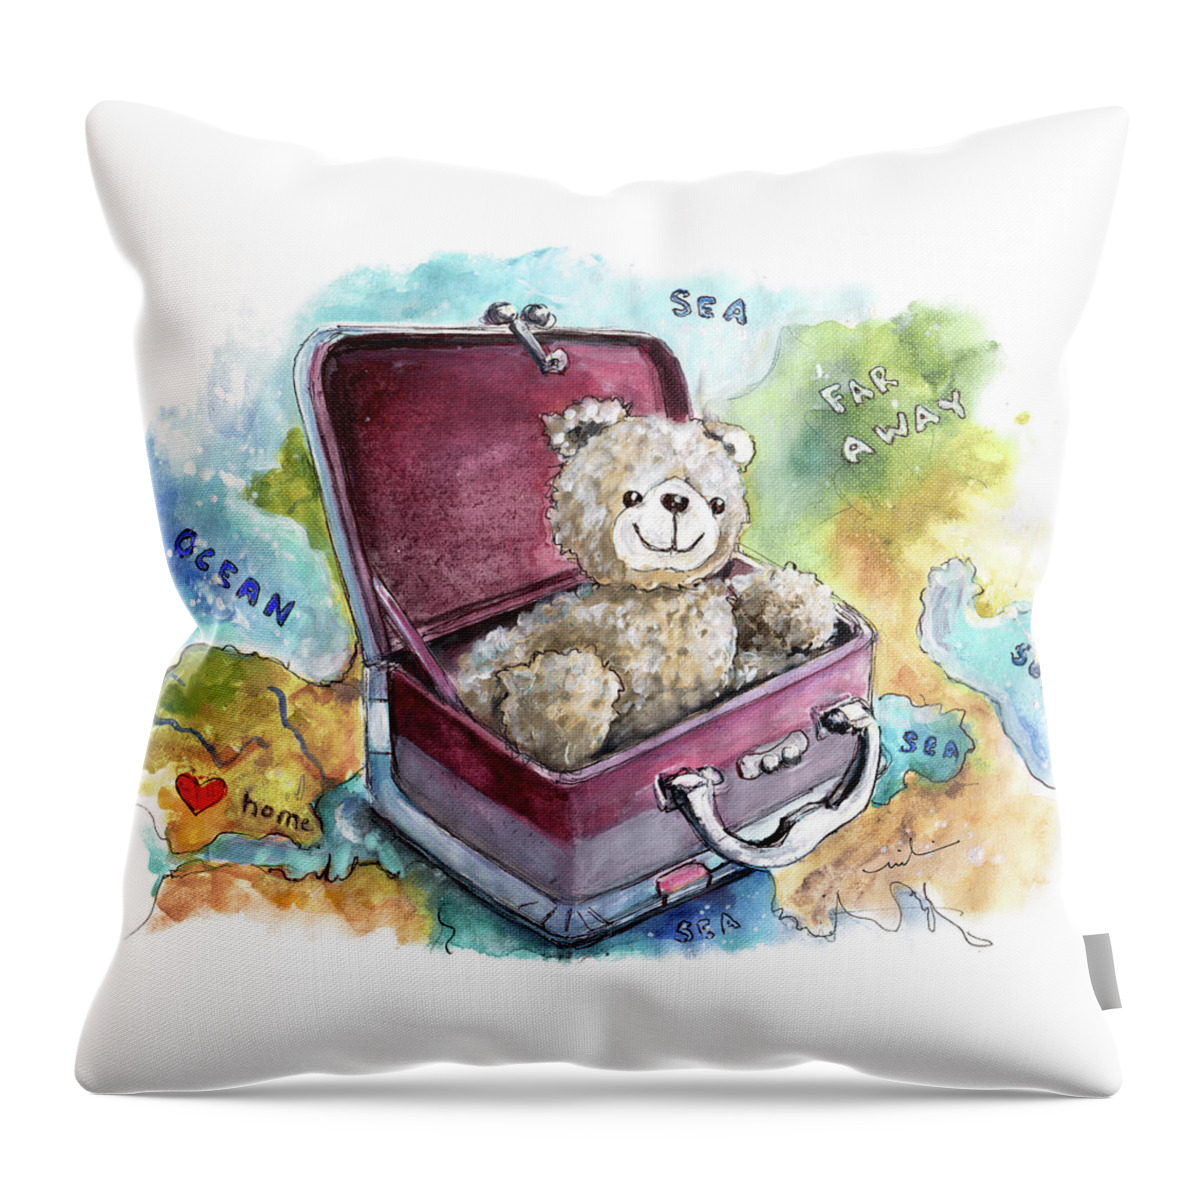 Truffle Mcfurry Throw Pillow featuring the painting Ramble The Travel Ted by Miki De Goodaboom